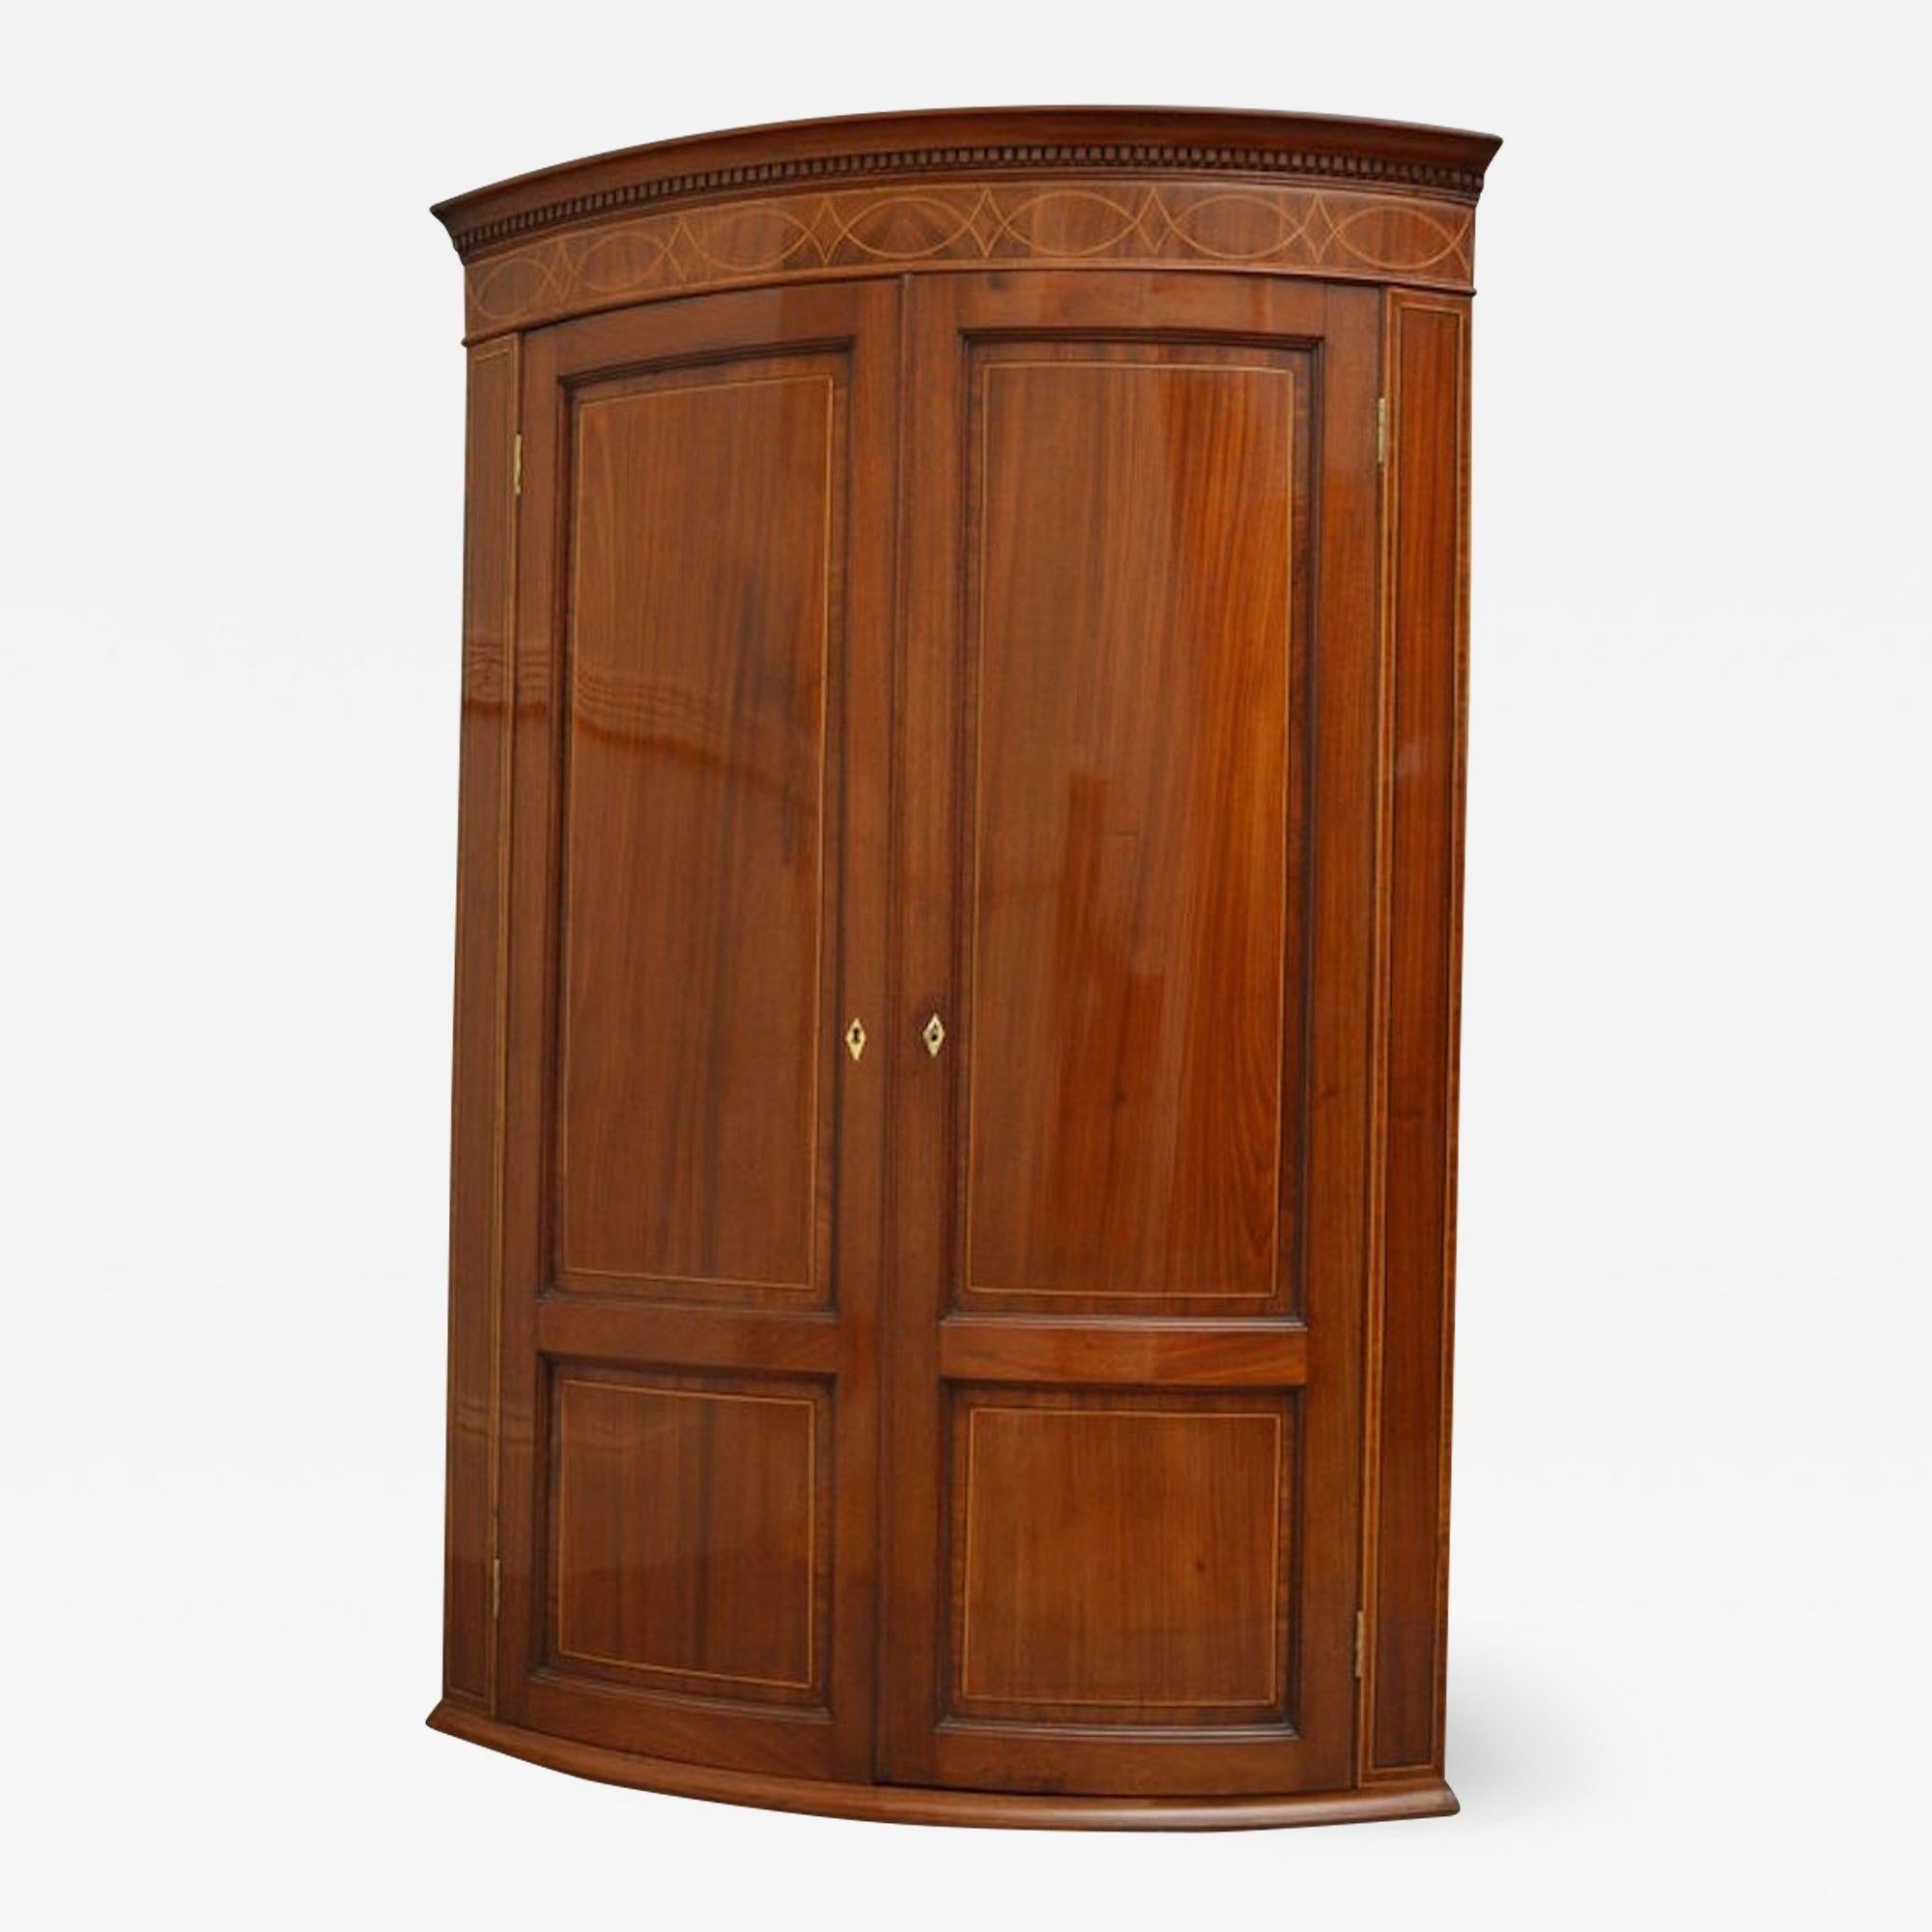 Sn2700 Good quality and very attractive Regency, mahogany corner cupboard of elegant outline, having dentil cornice above satinwood string inlaid frieze, figured mahogany double panelled doors with ivory escutcheons, enclosing 3 shelves and 2 small